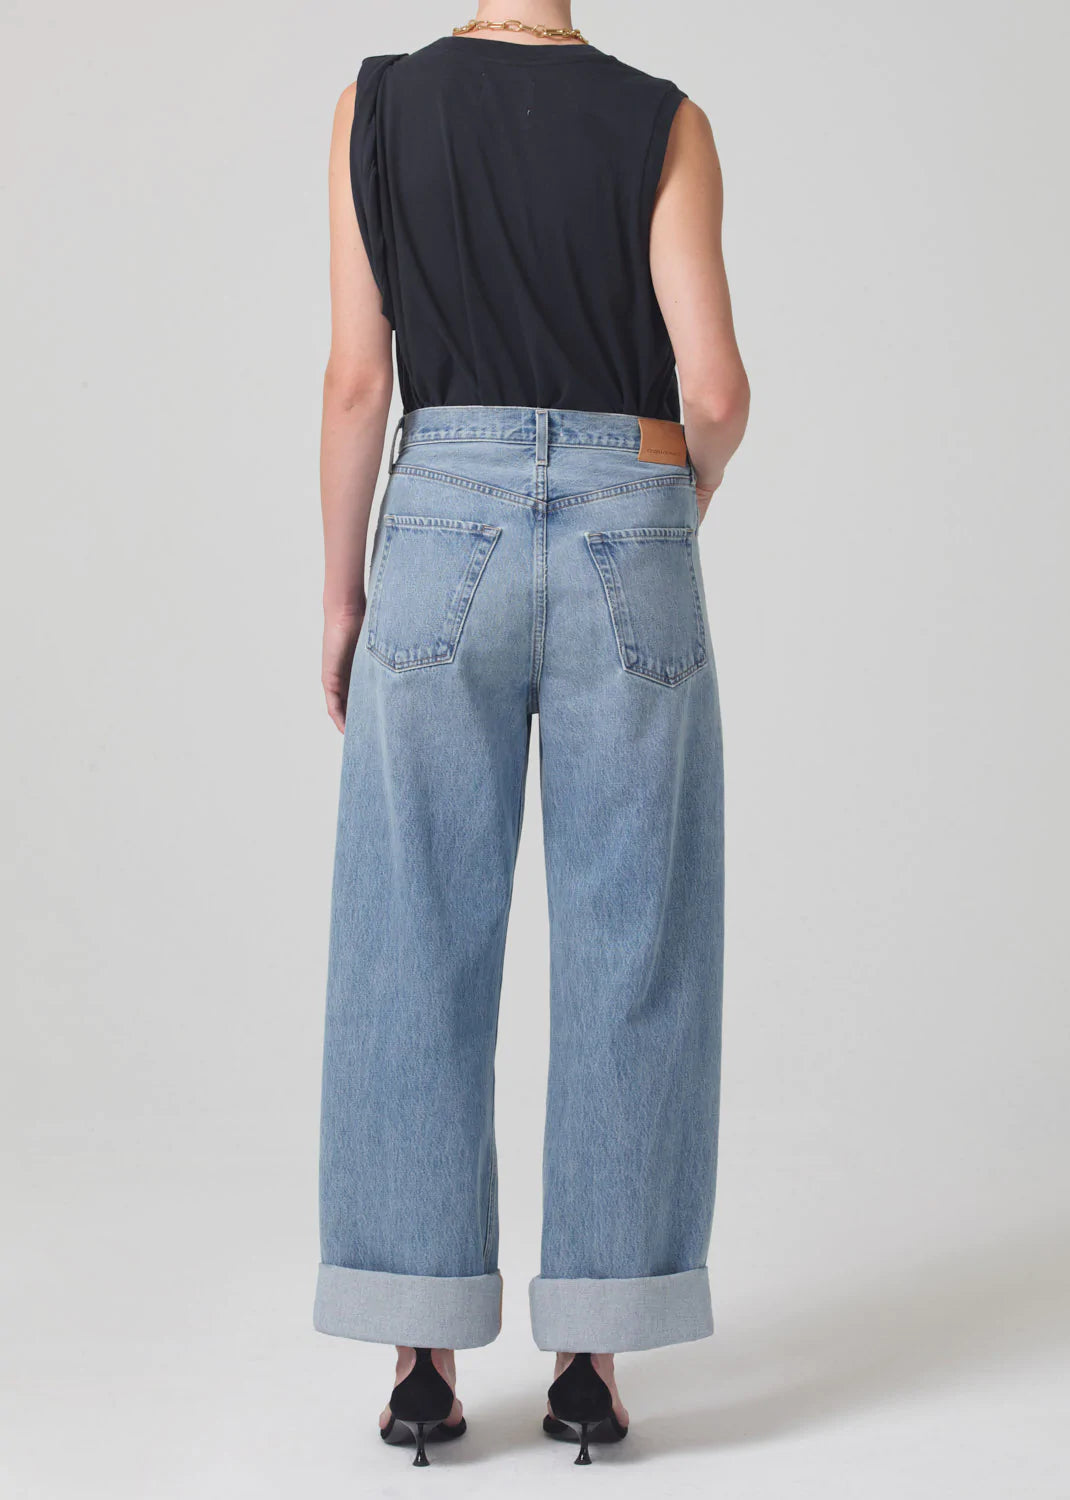 Citizens of Humanity Ayla Baggy Cuffed Crop, women's jeans, women's clothing, denim